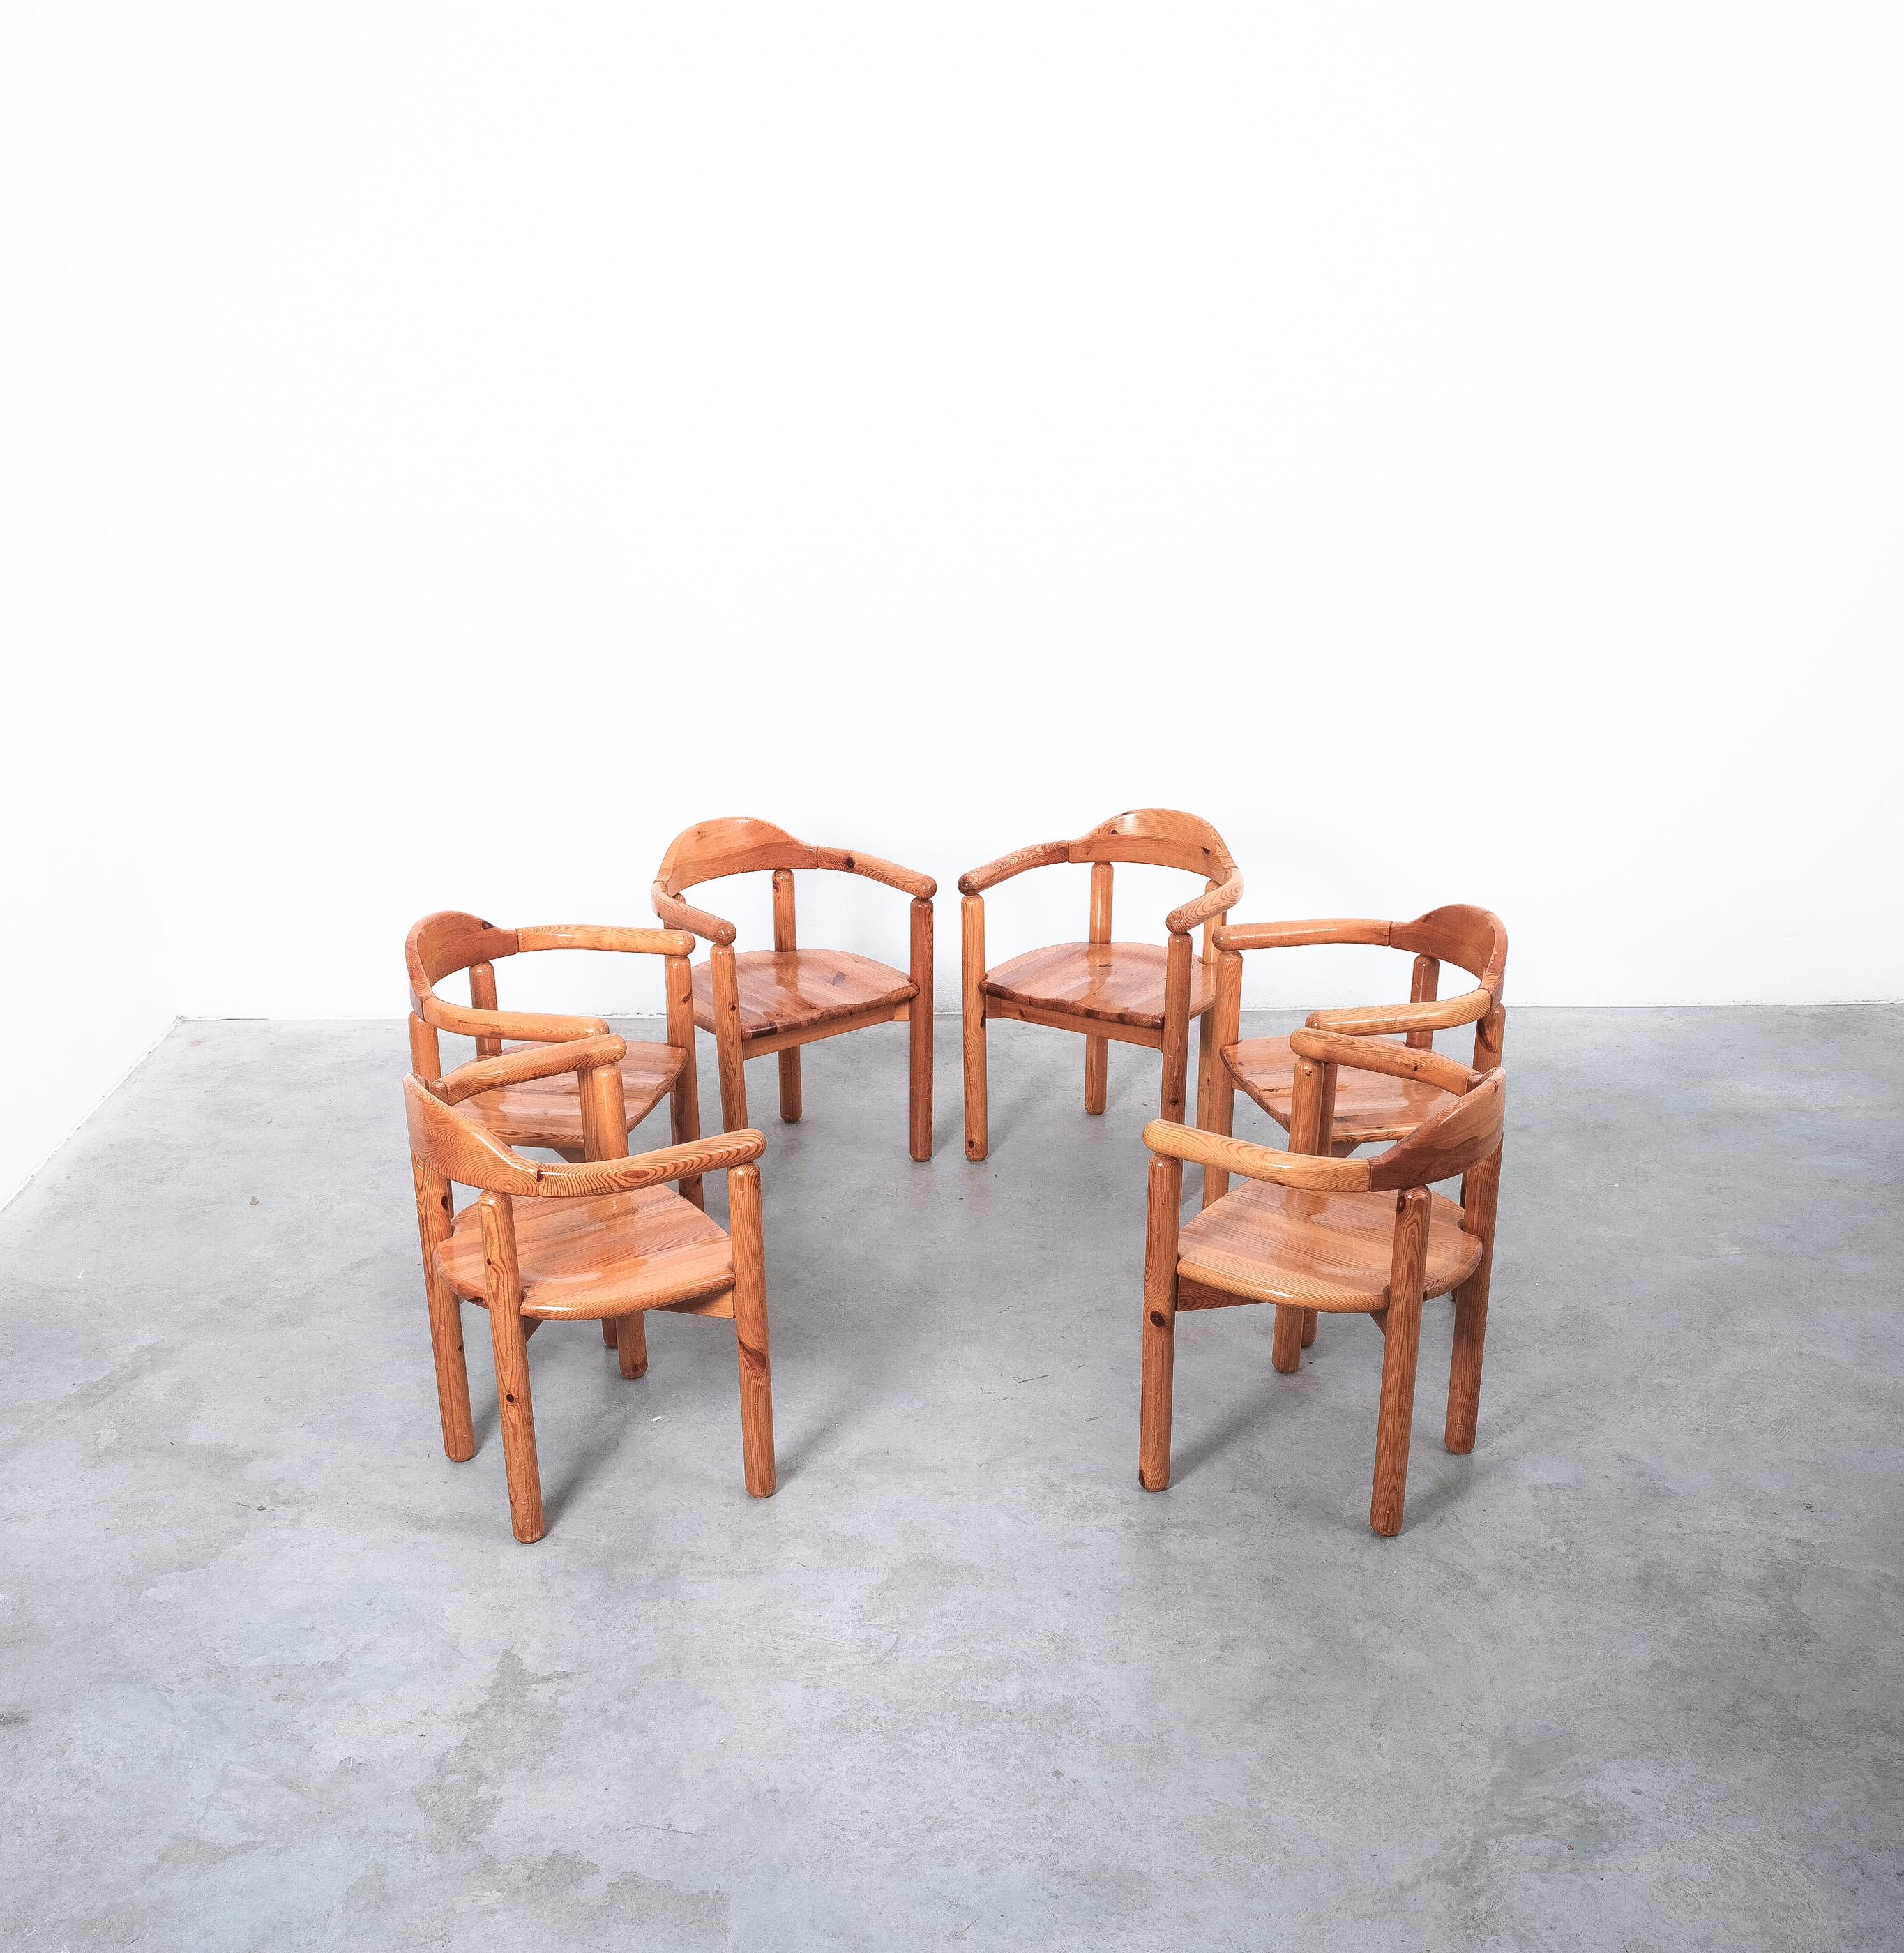 Rainer Daumiller Solid Pine Wood Dining Chairs '2' Danish Design, 1970 For Sale 5